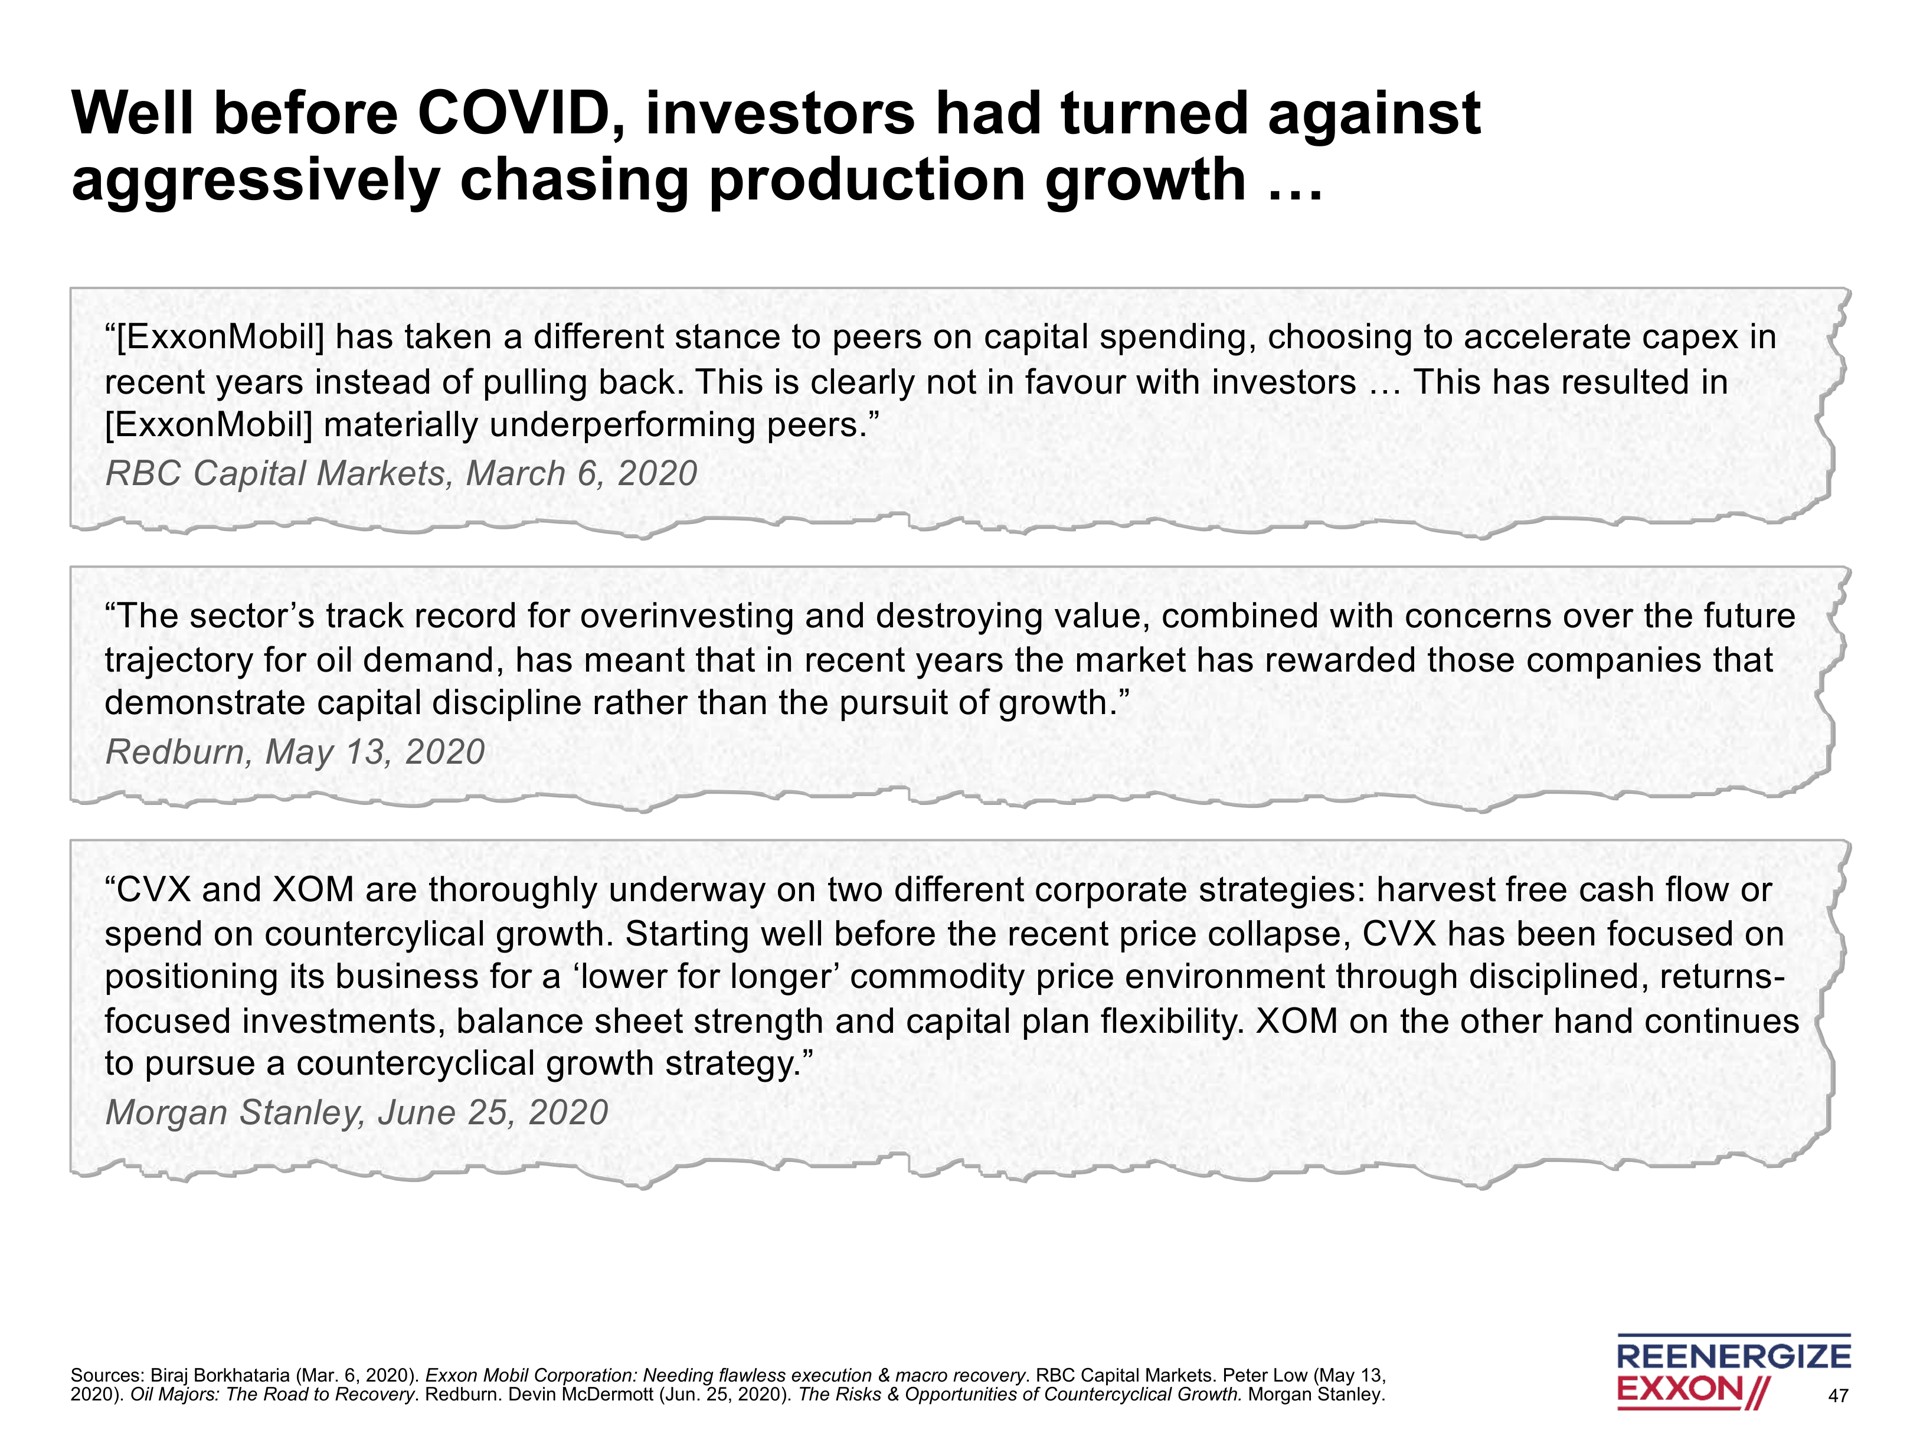 well before covid investors had turned against aggressively chasing production growth | Engine No. 1